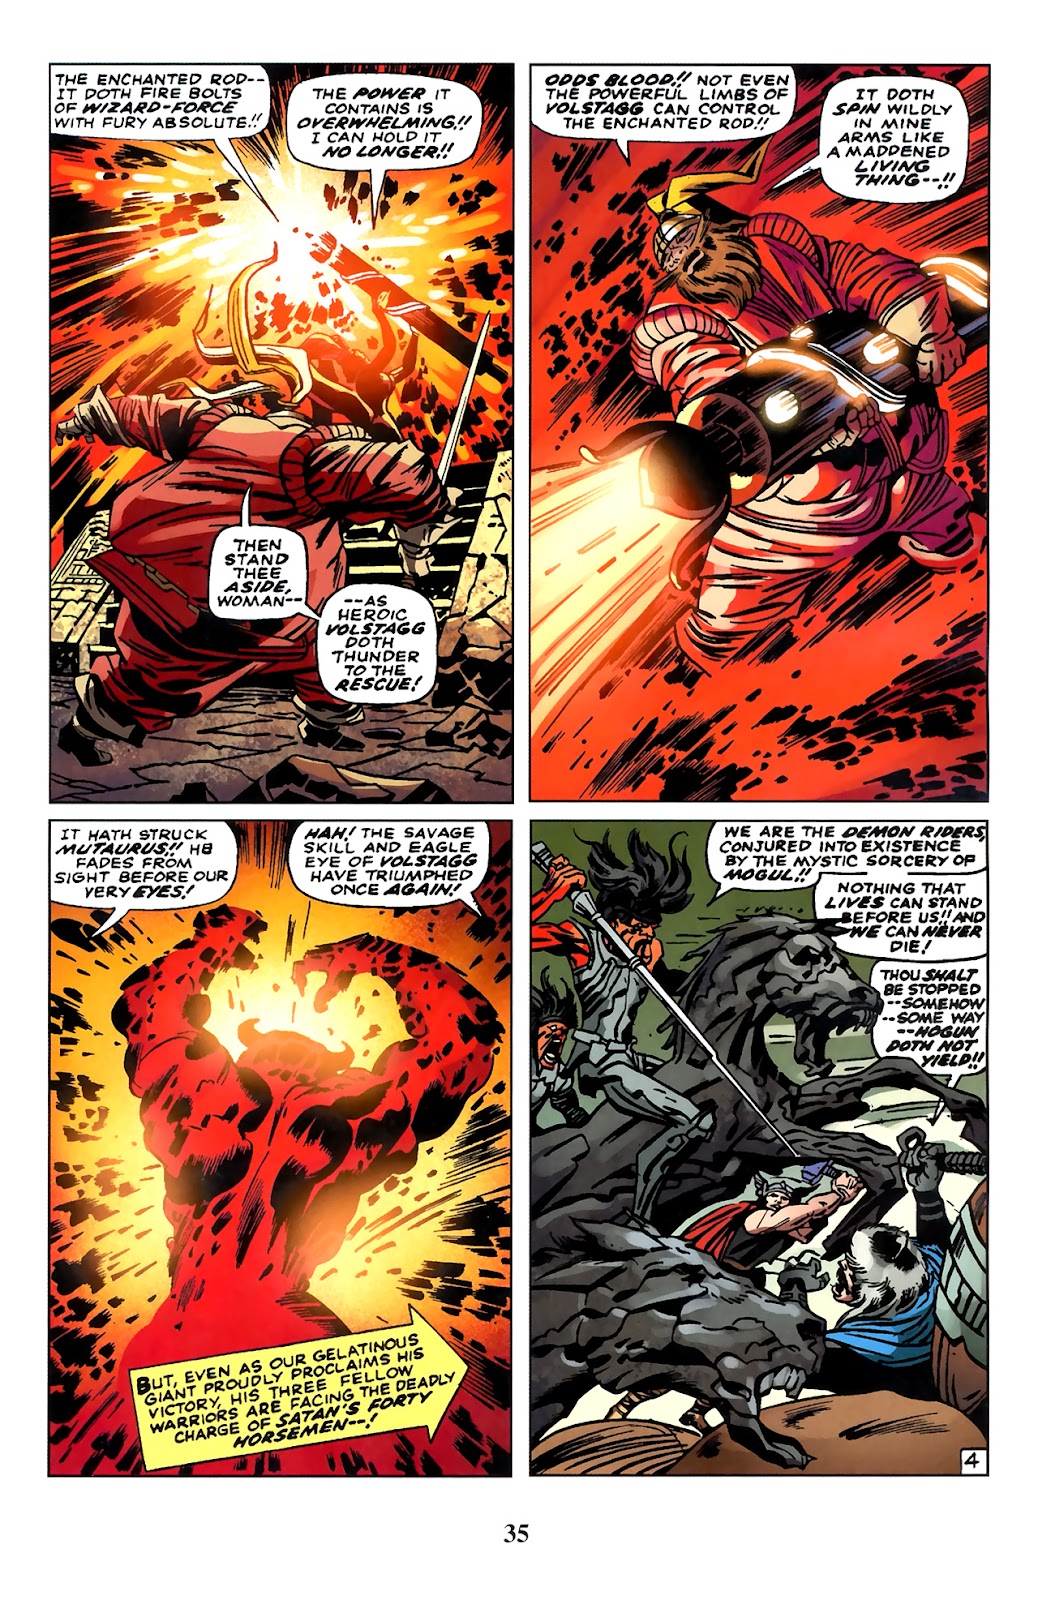 Thor: Tales of Asgard by Stan Lee & Jack Kirby issue 6 - Page 37